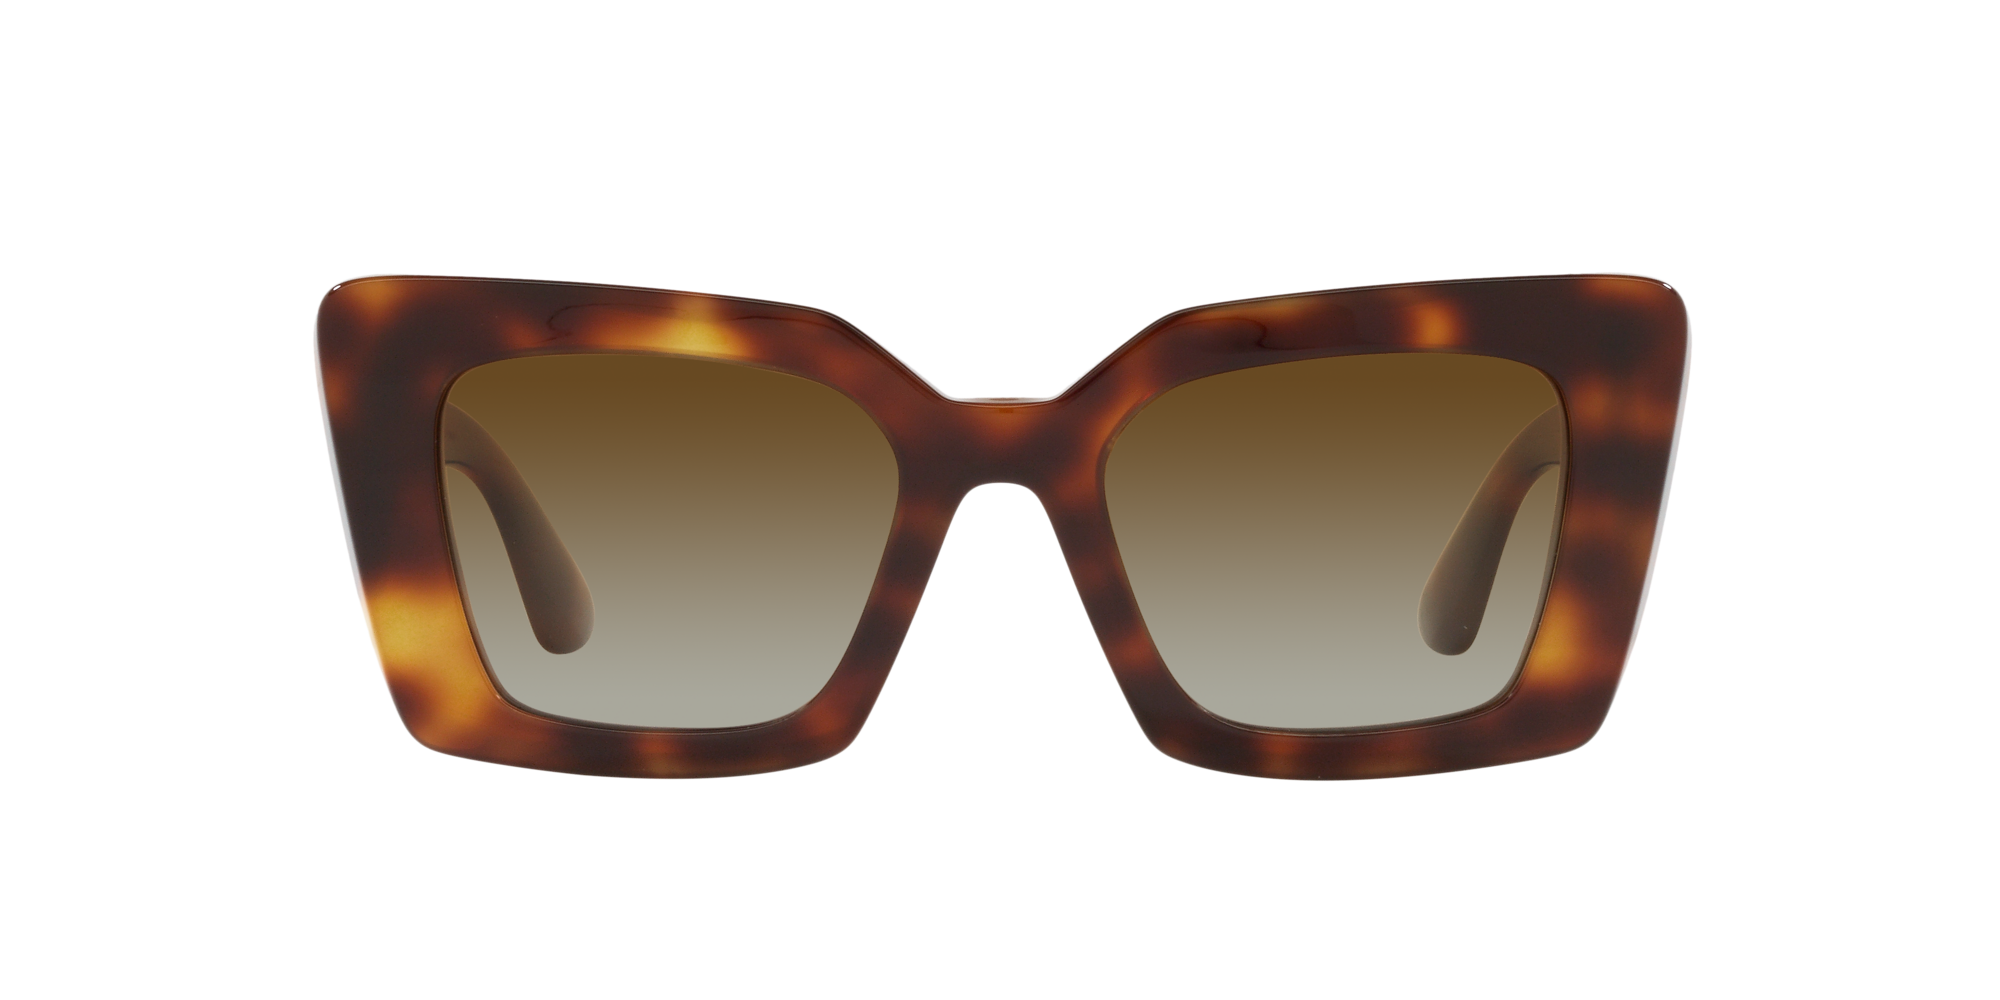 [products.image.front] Burberry 0BE4344 3316T5 Sonnenbrille